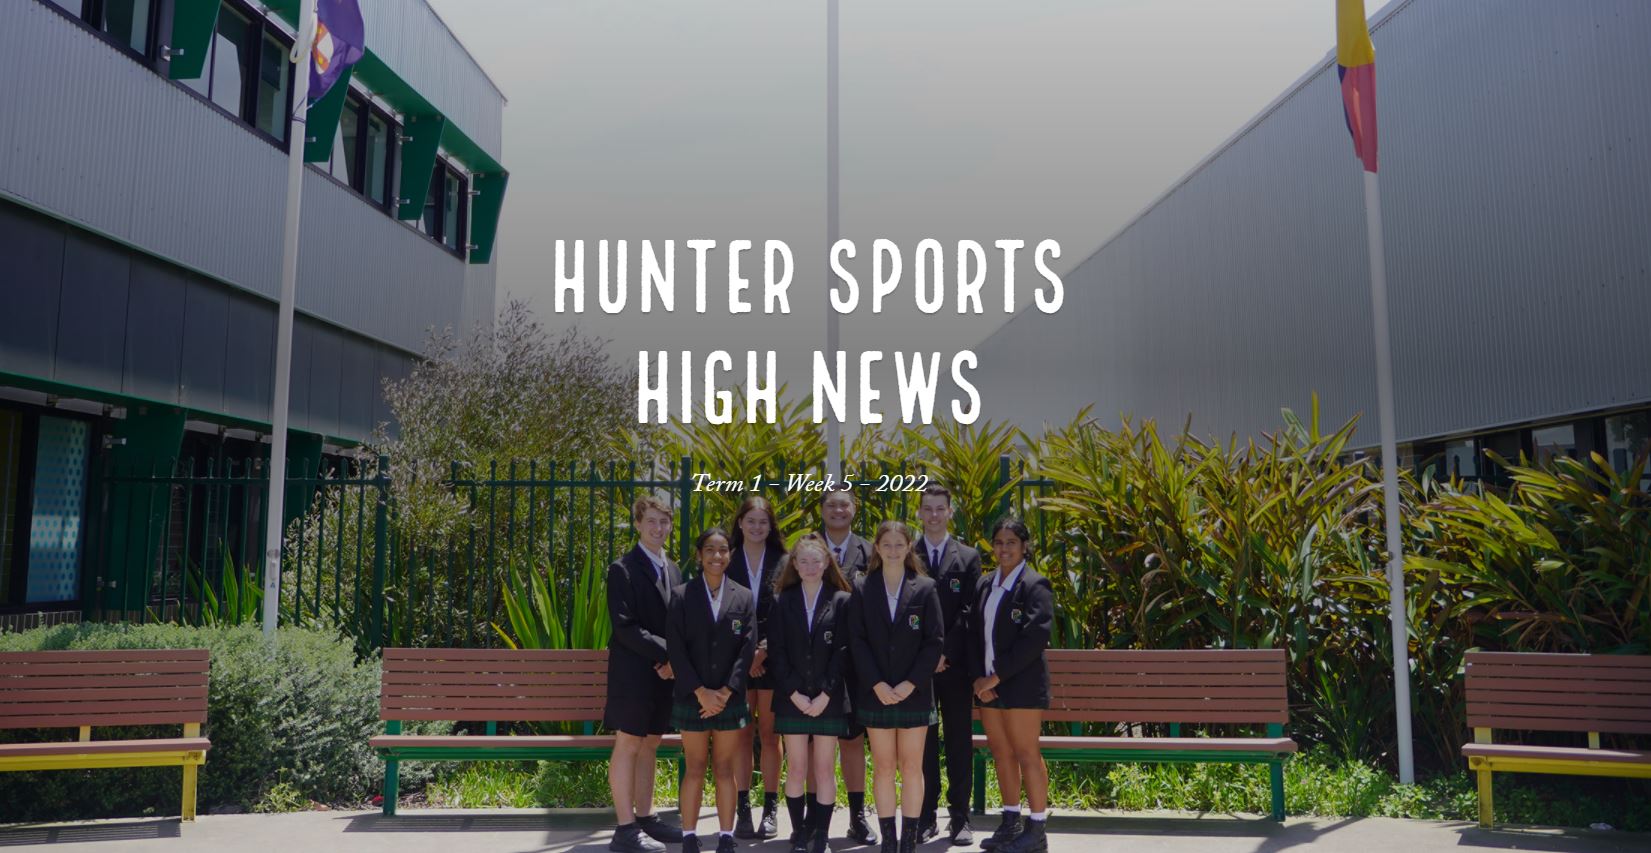 7 student leaders standing under flagpoles smiling, wearing school uniforms and blazers 